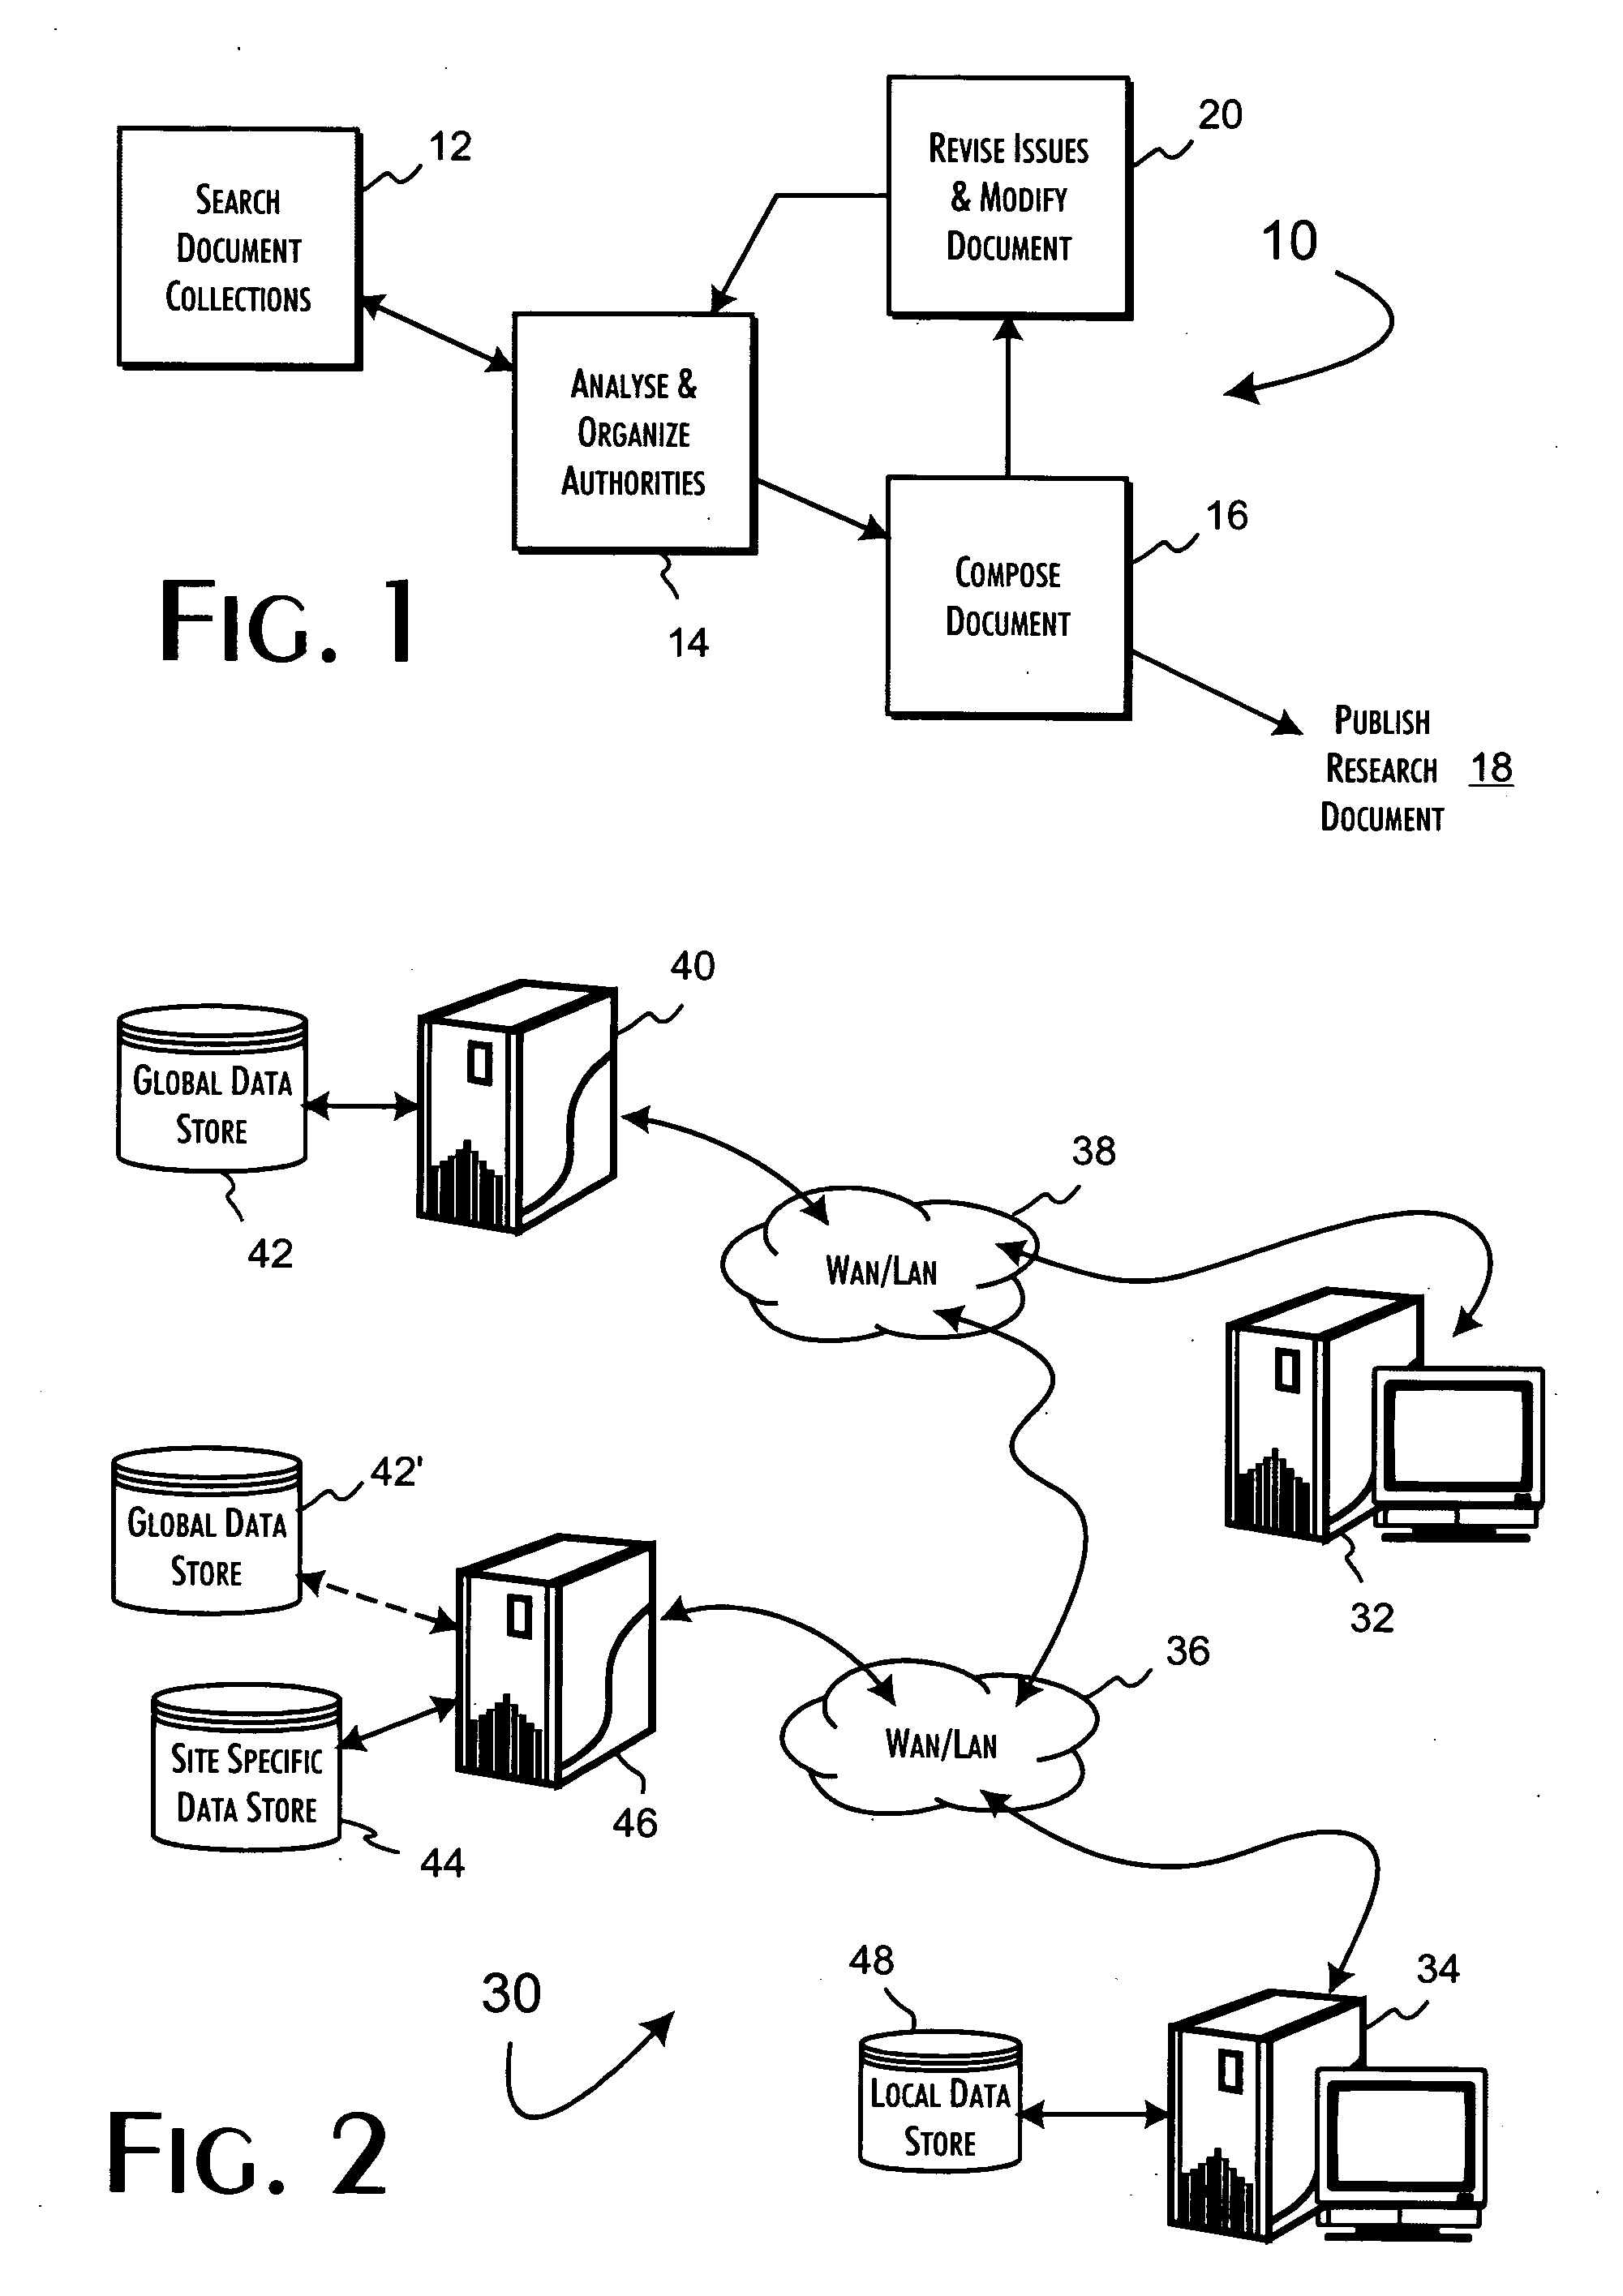 System and methods for analytic research and literate reporting of authoritative document collections